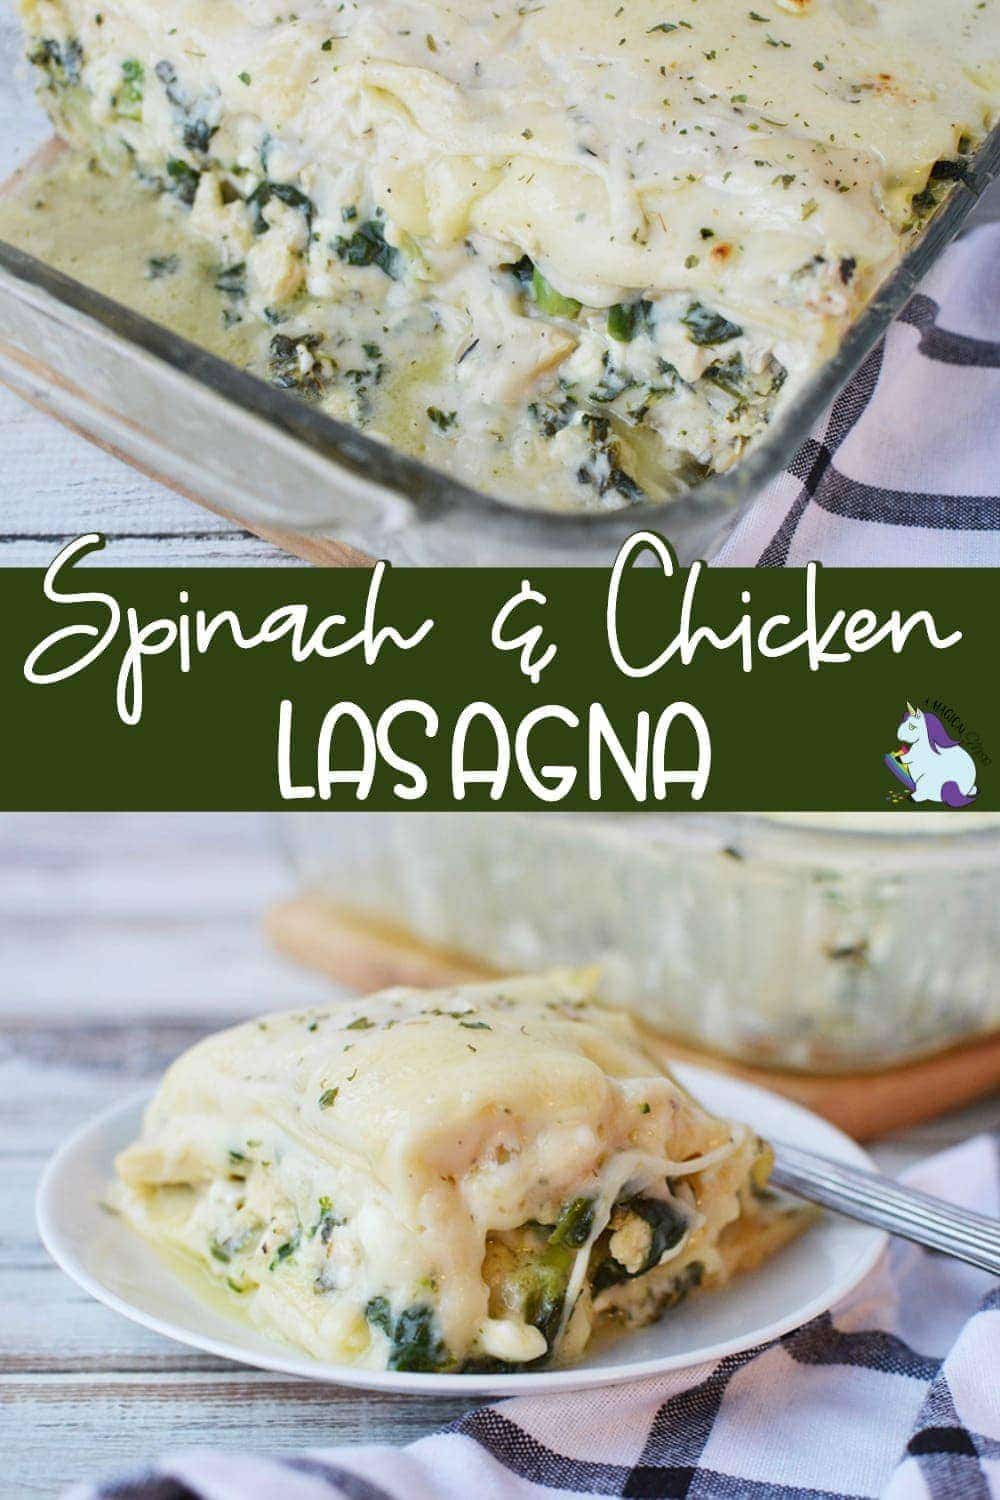 Spinach lasagna in the pan and sliced on a plate